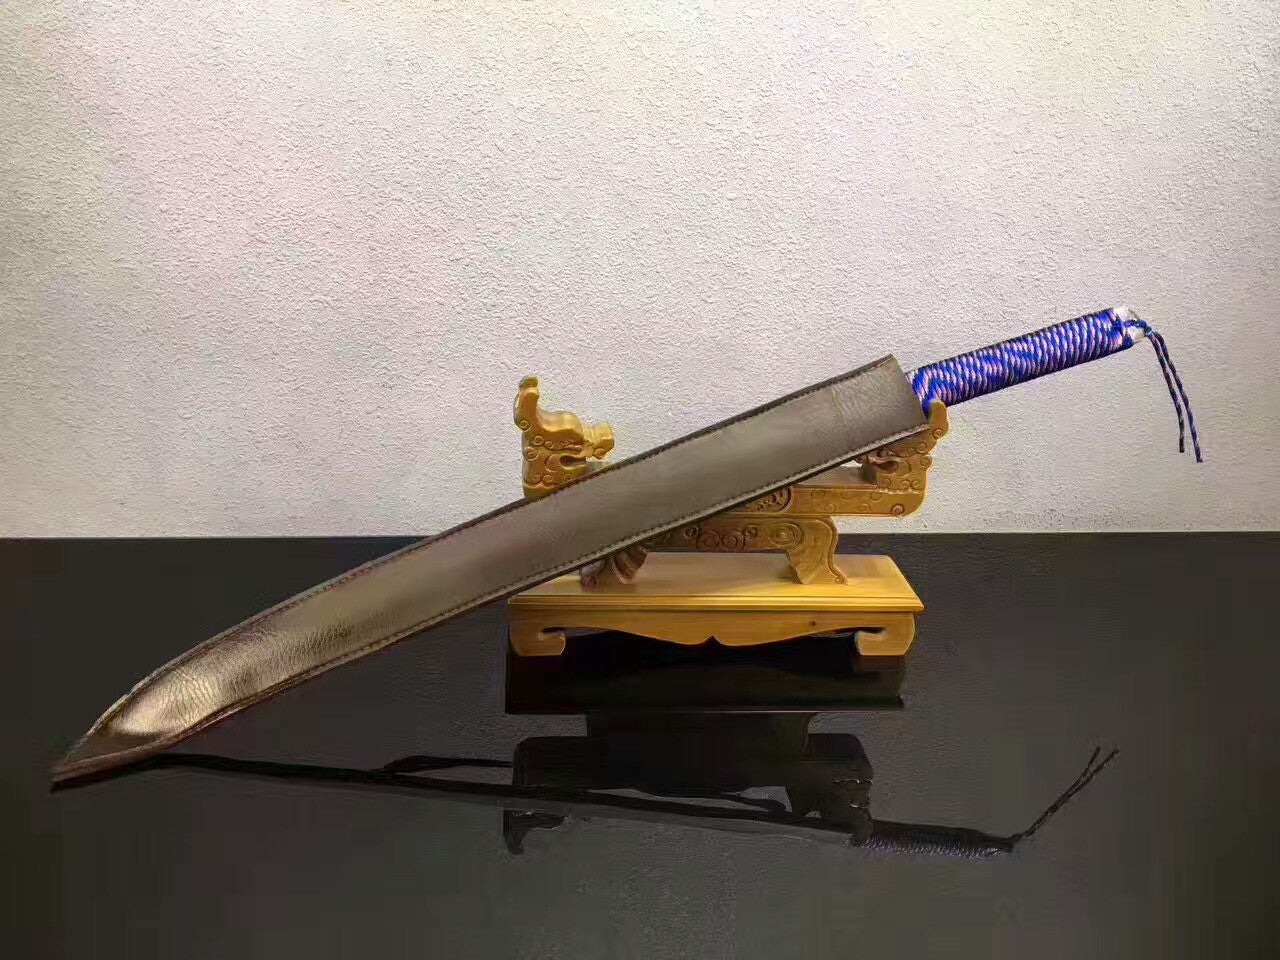 Integrated sword(Damascus steel,PU scabbard)Full tang,Length 30" - Chinese sword shop